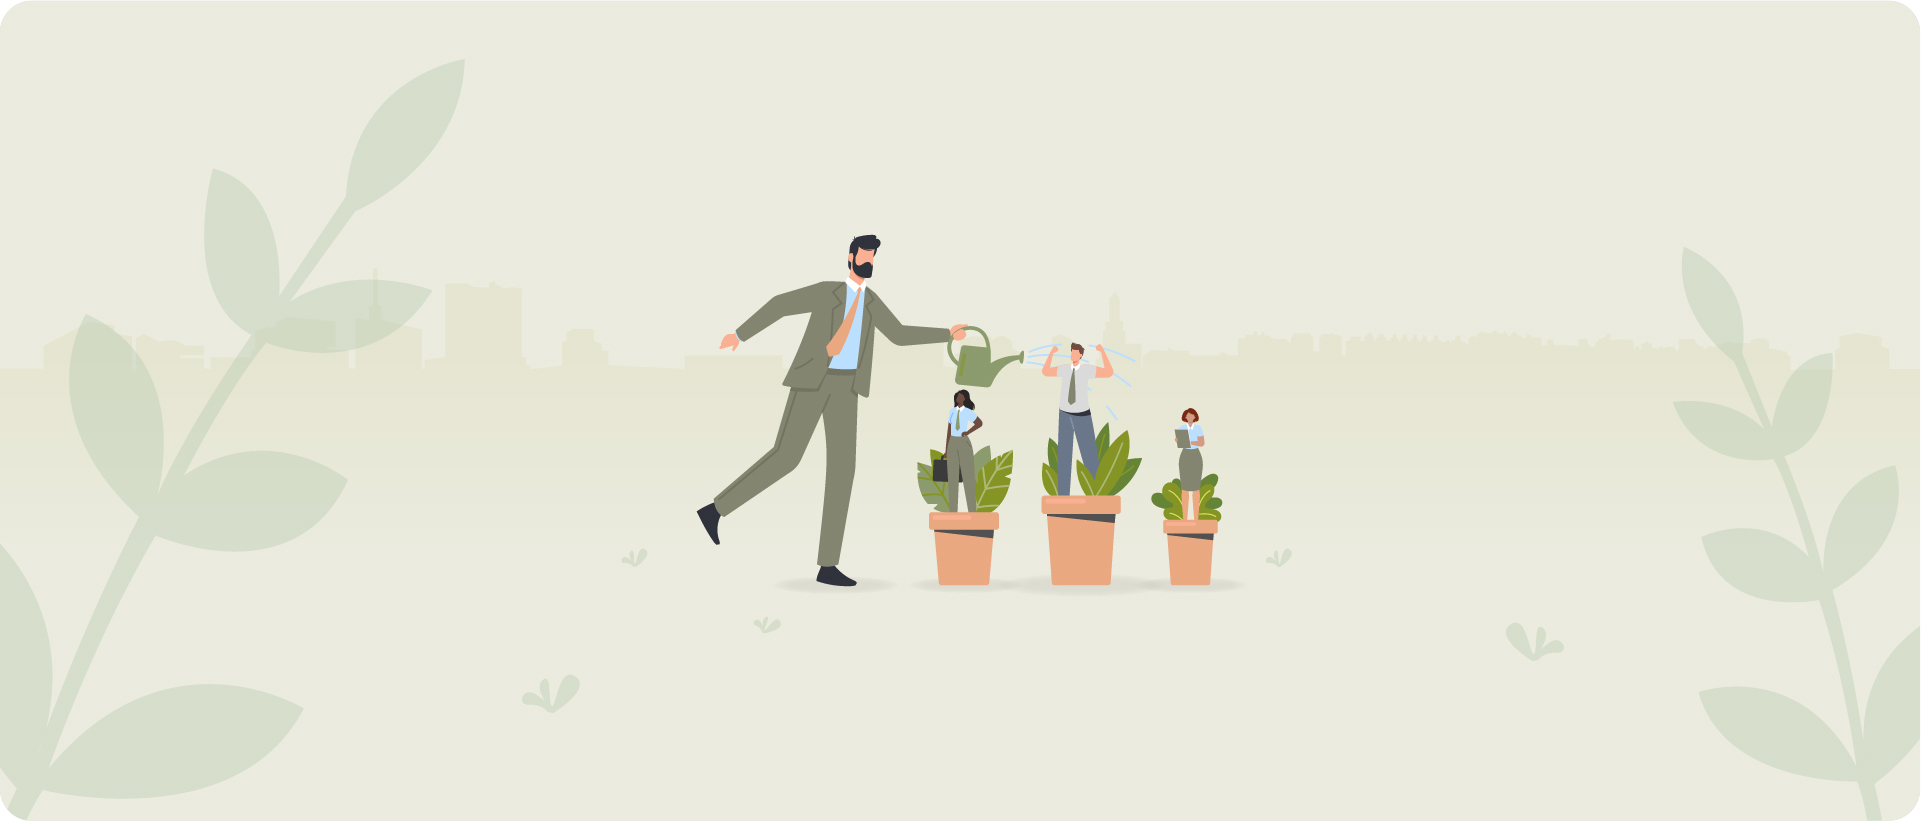 Graphic representing internal mobility as a man watering three plants